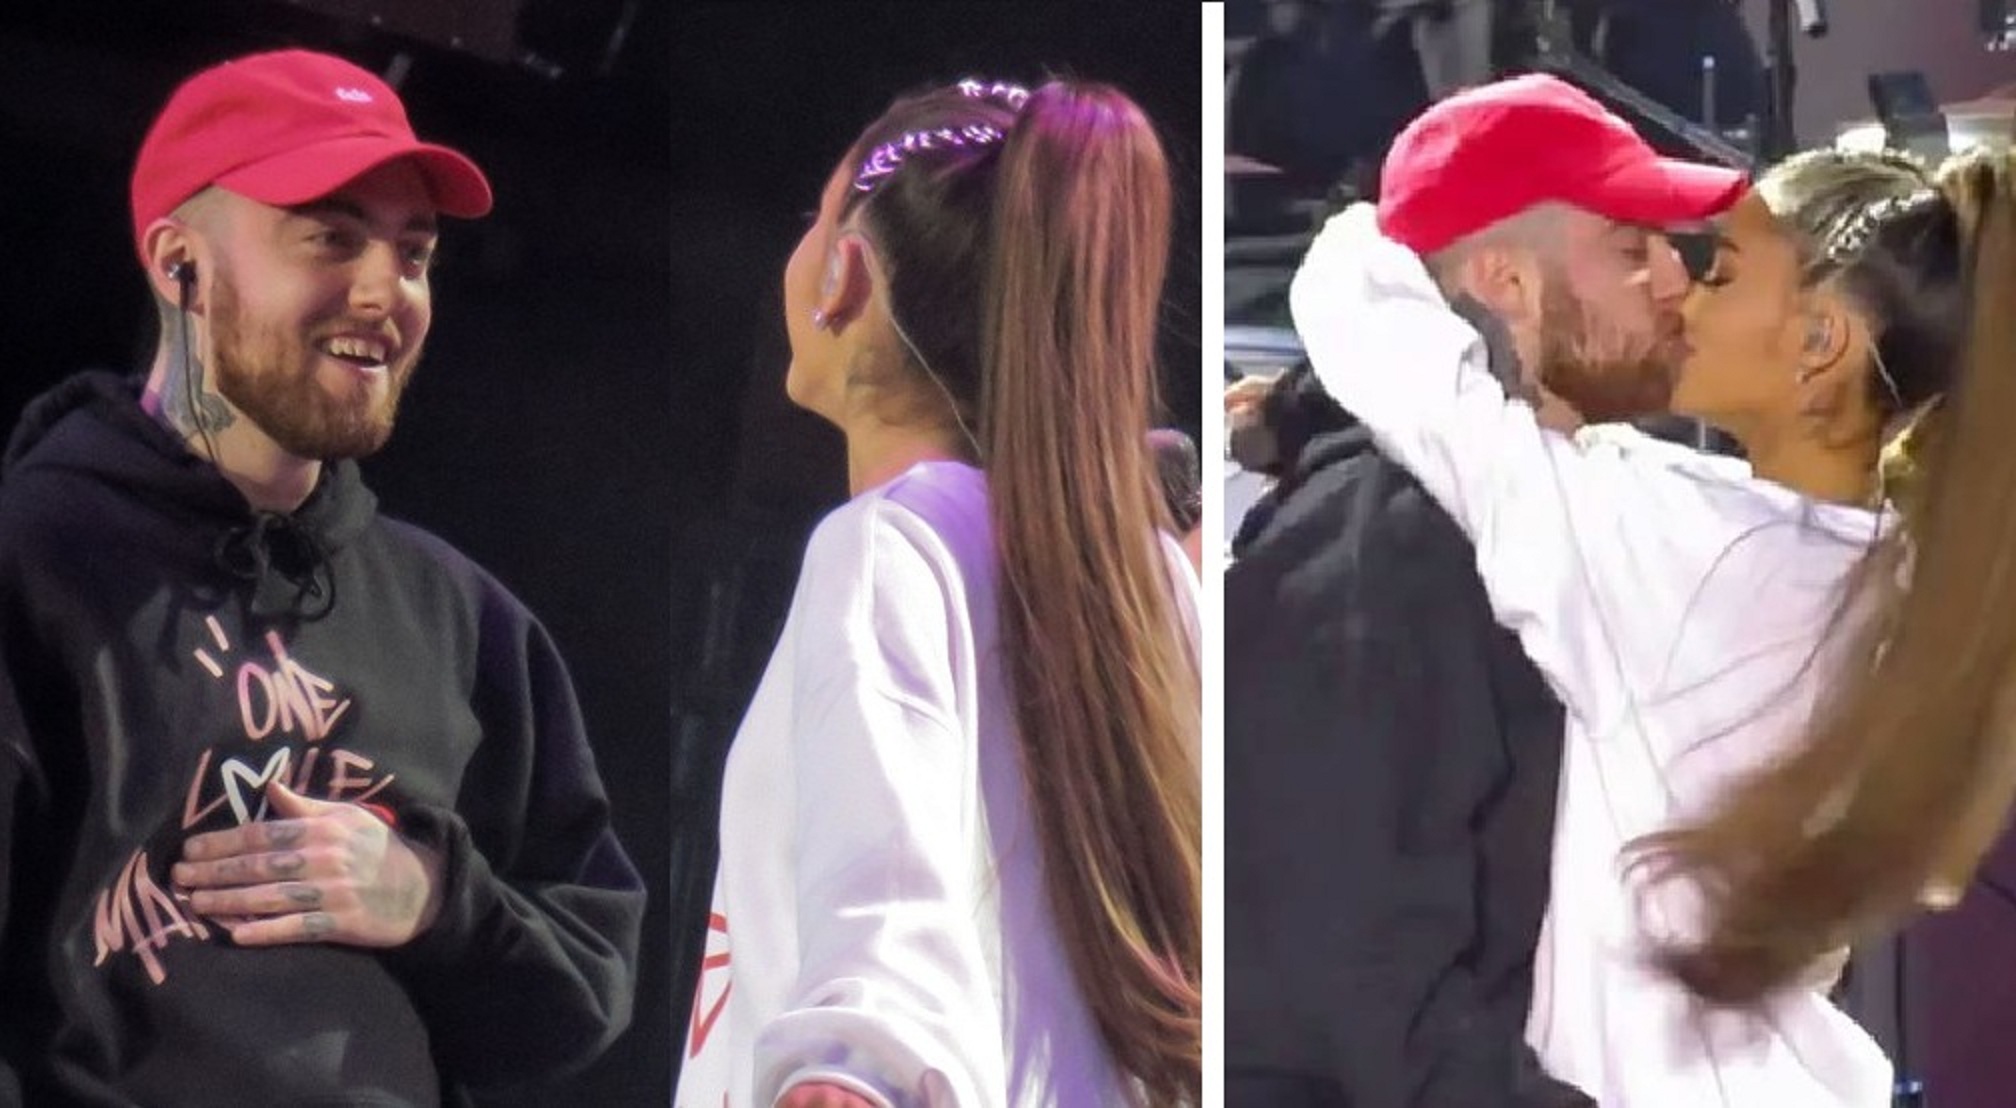 Watch: Mac Miller’s Last Performance with Ariana Grande at ‘One Love Manchester’ concert!